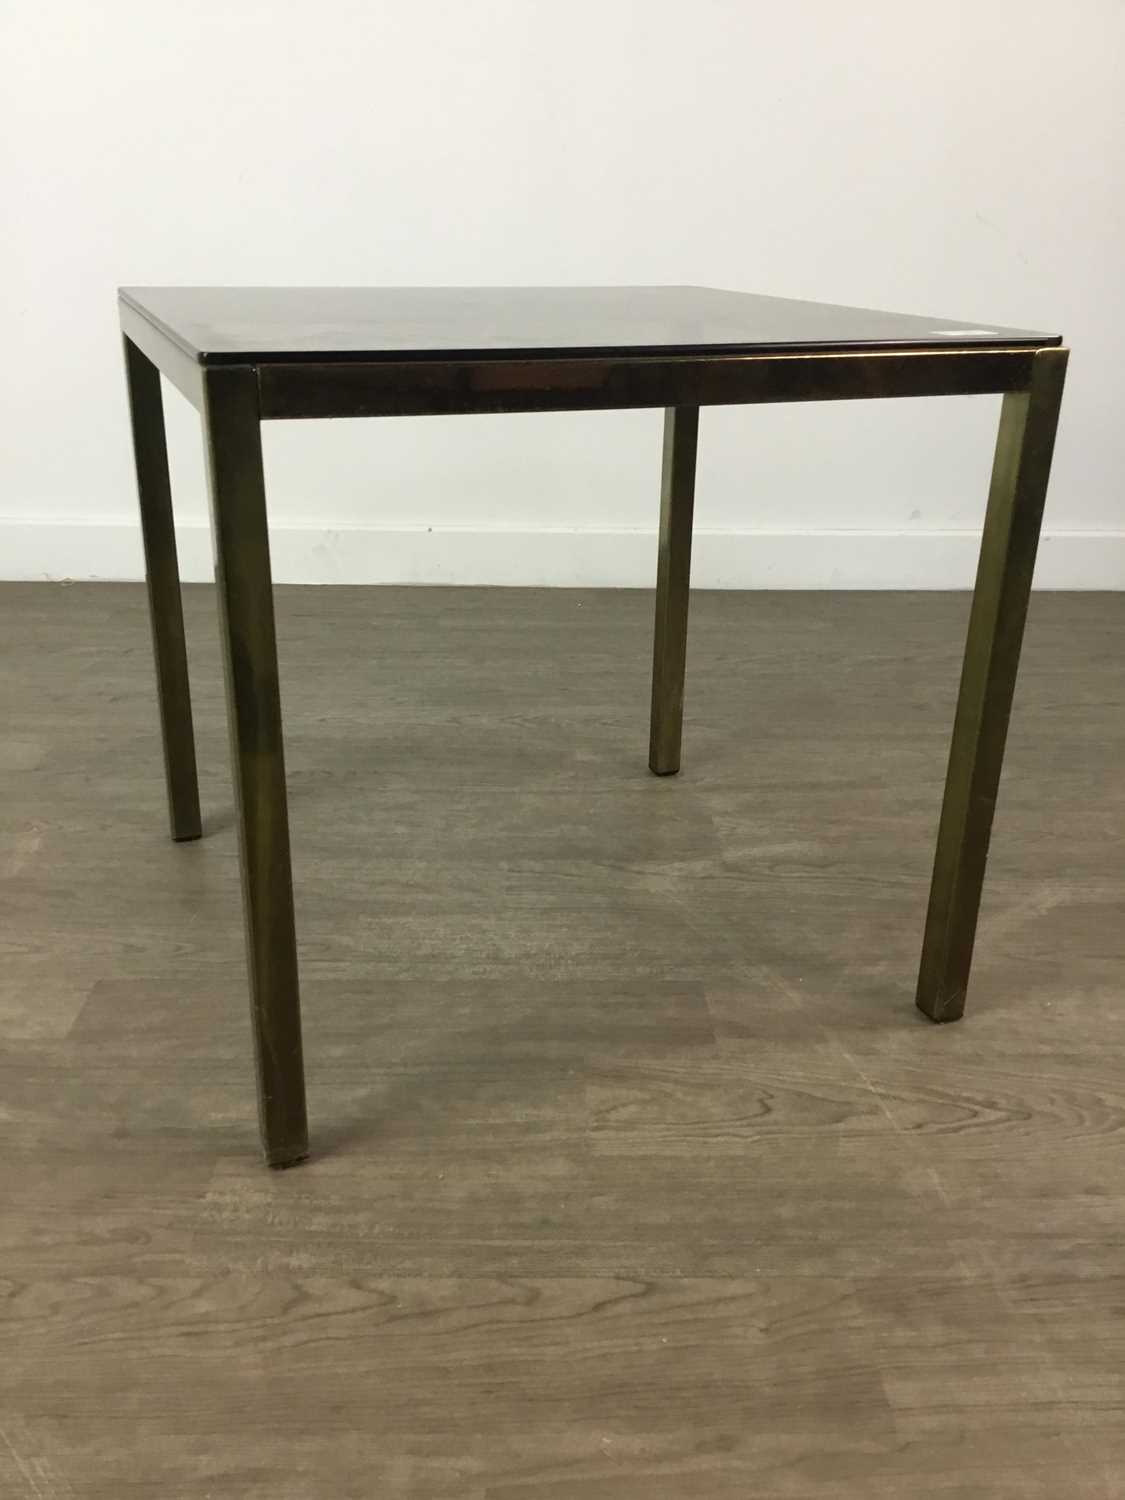 A GLASS TOPPED OCCASIONAL TABLE AND A PINE OCCASIONAL TABLE